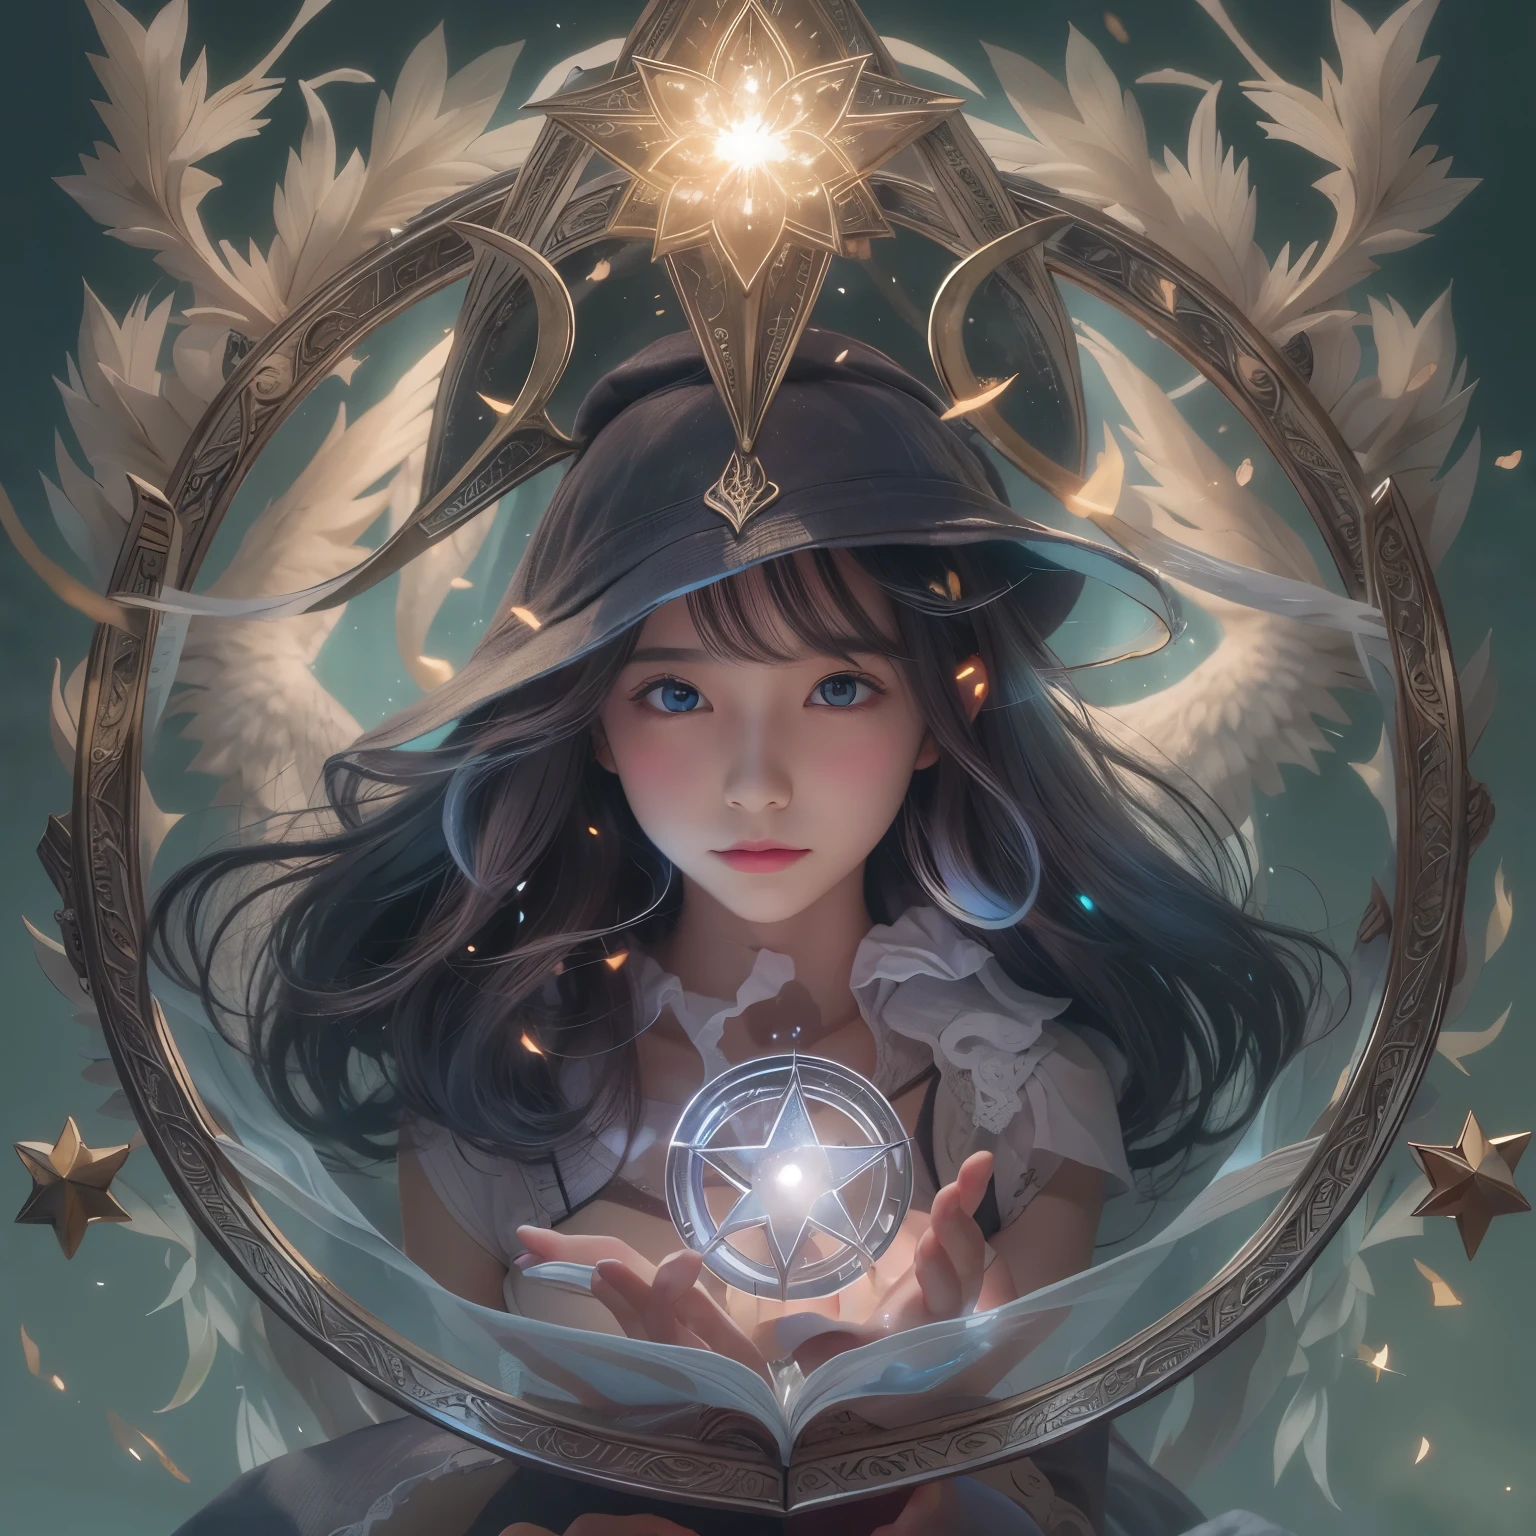 detailed face, cute face, A powerful spell that creates a magical protective barrier., A woman who uses green magic to summon a magical shield is perfect for a fantasy world..